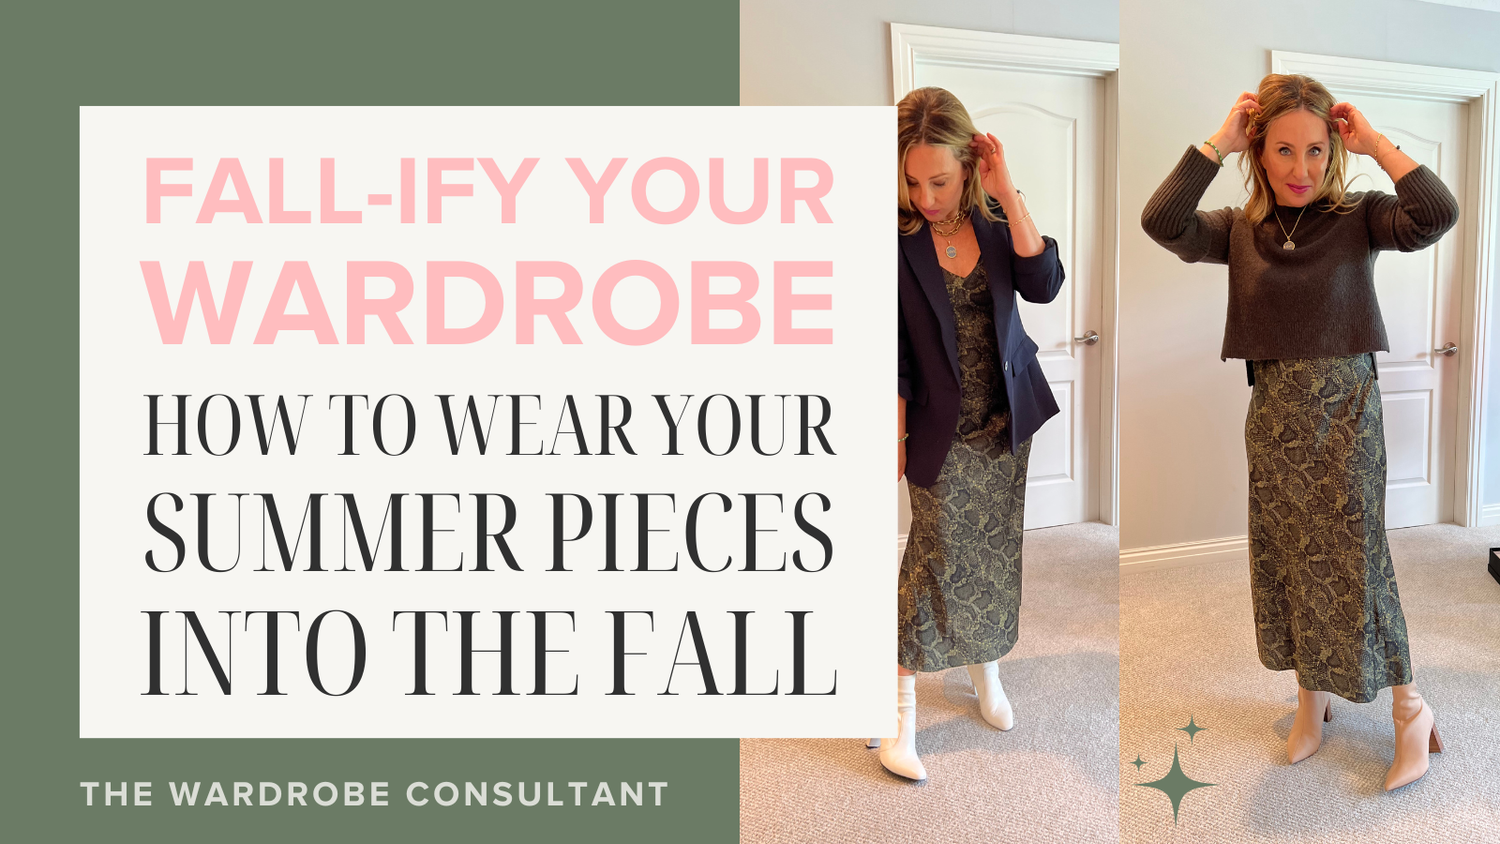 Fall-ify Your Wardrobe: How To Wear Your Summer Pieces Into The Fall ...